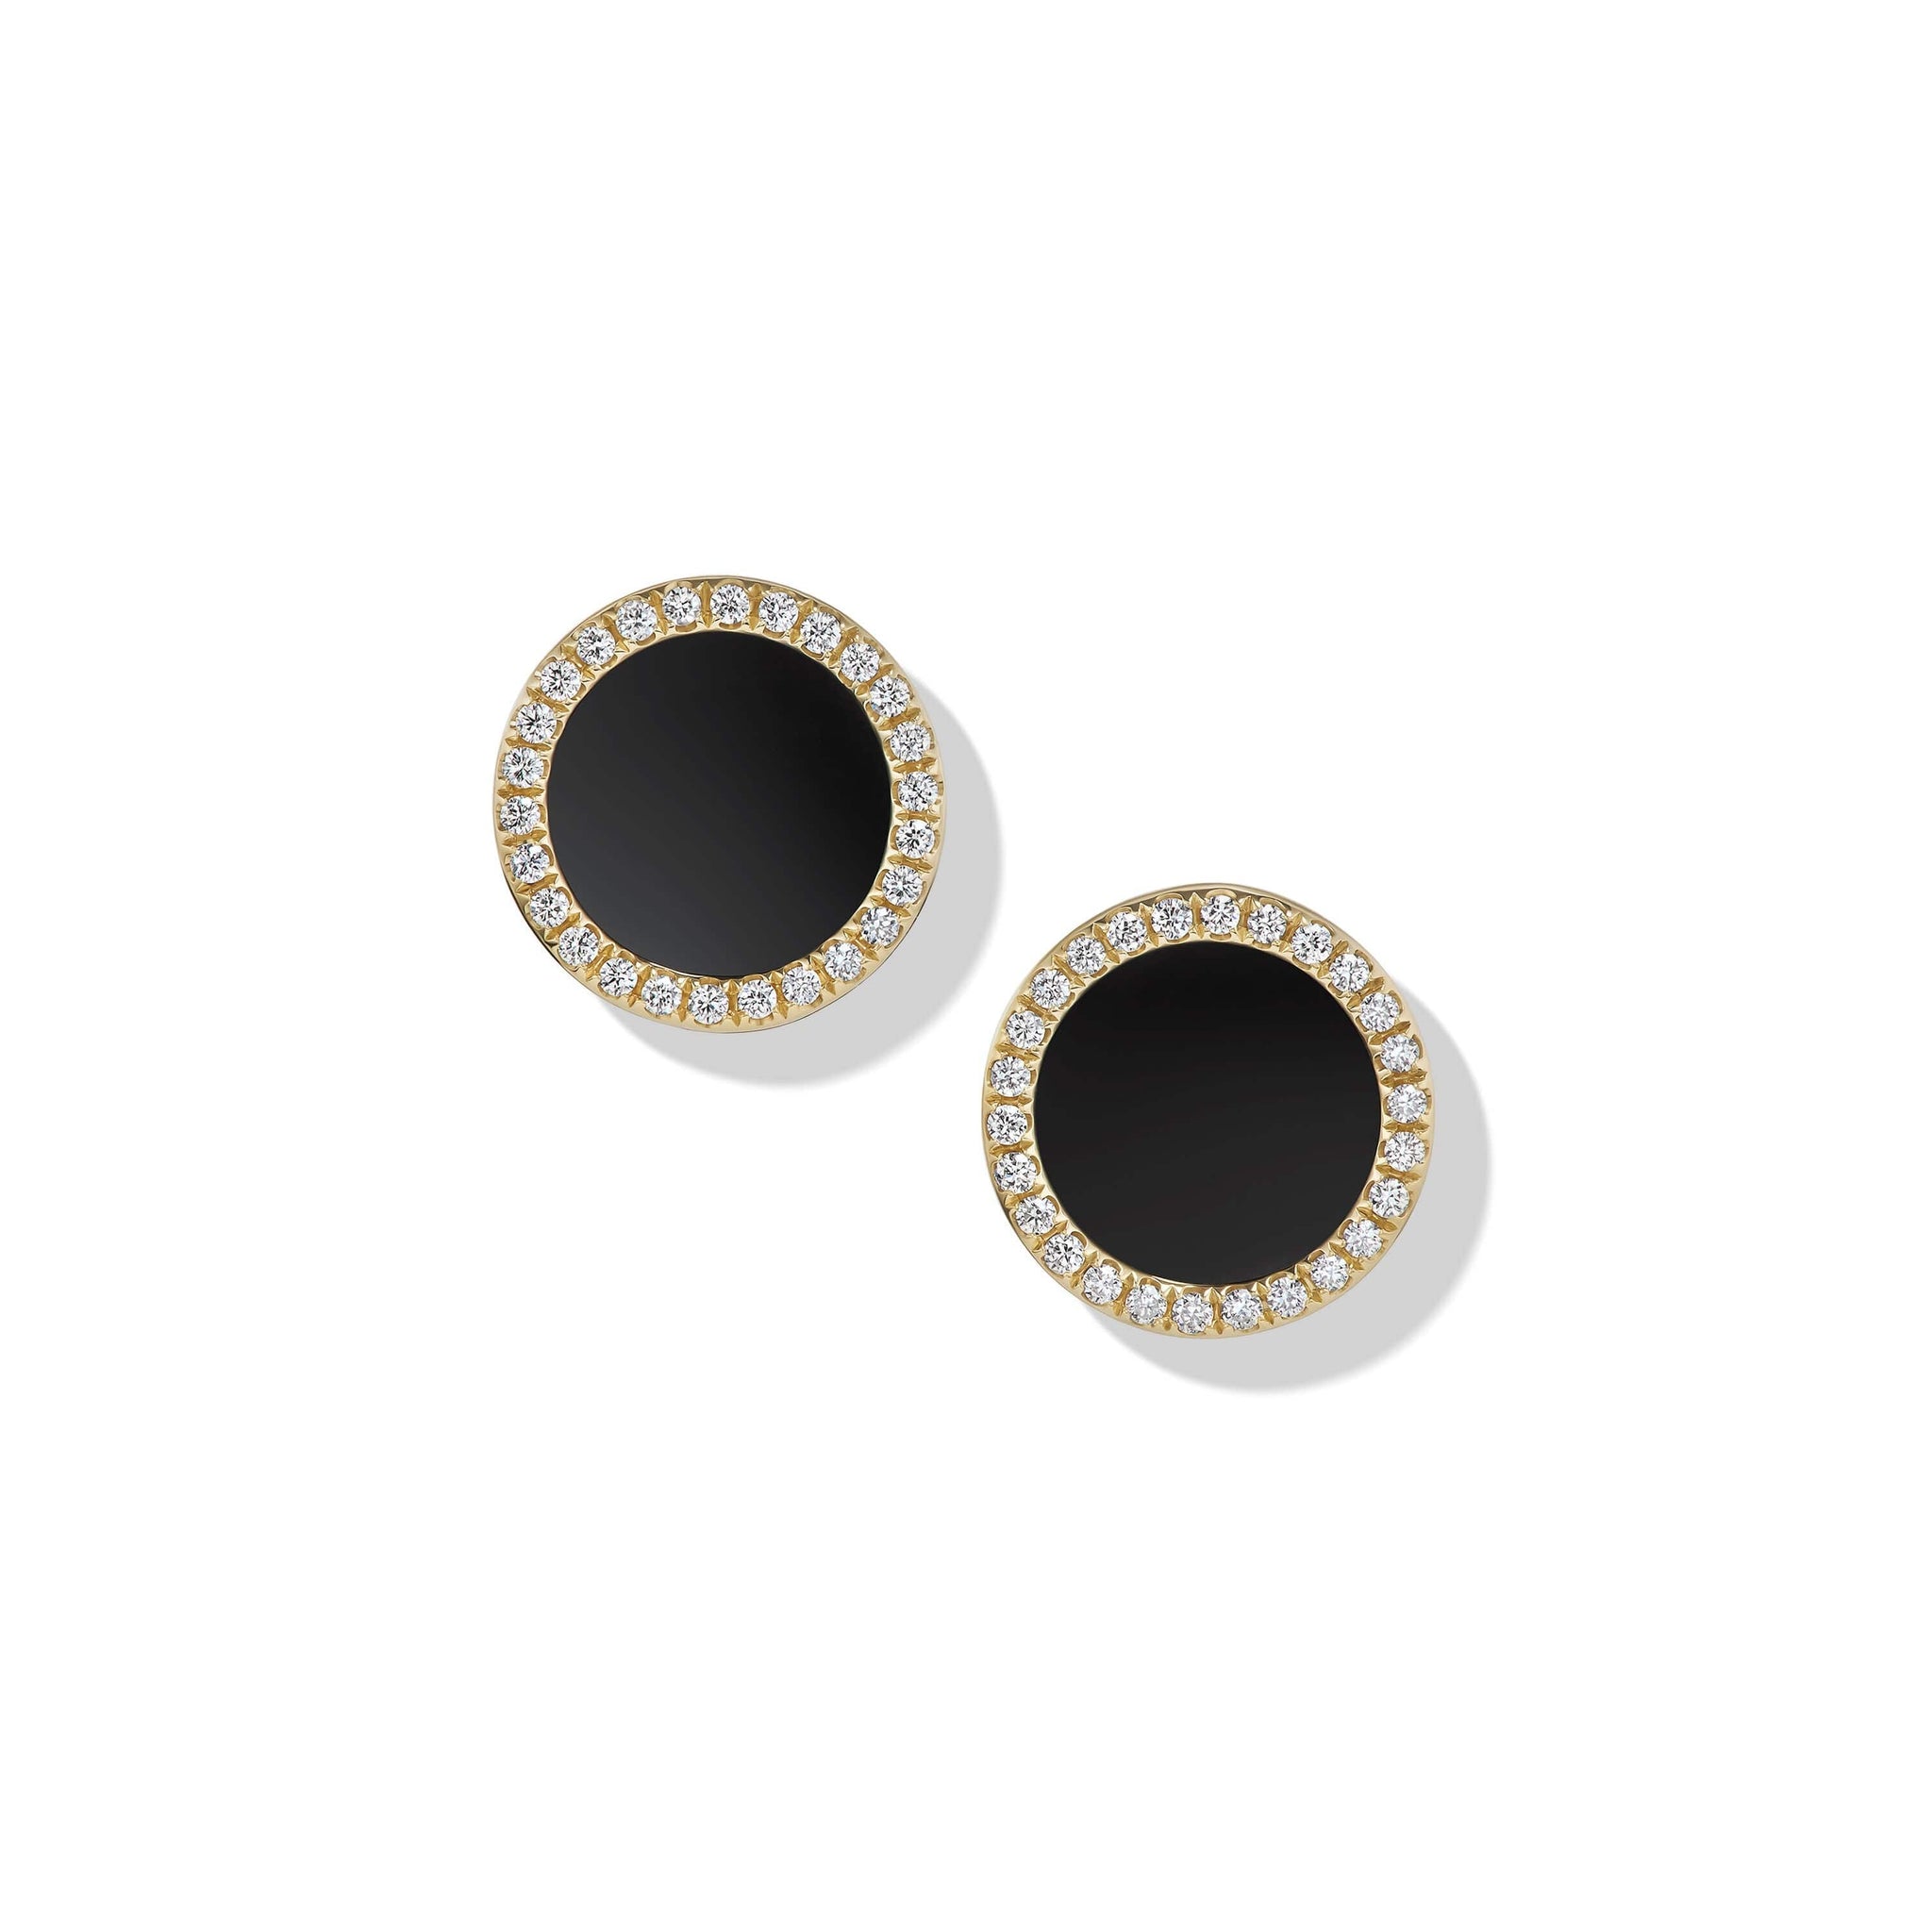 Petite DY Elements® Stud Earrings in 18K Yellow Gold with Black Onyx and Pavé Diamonds